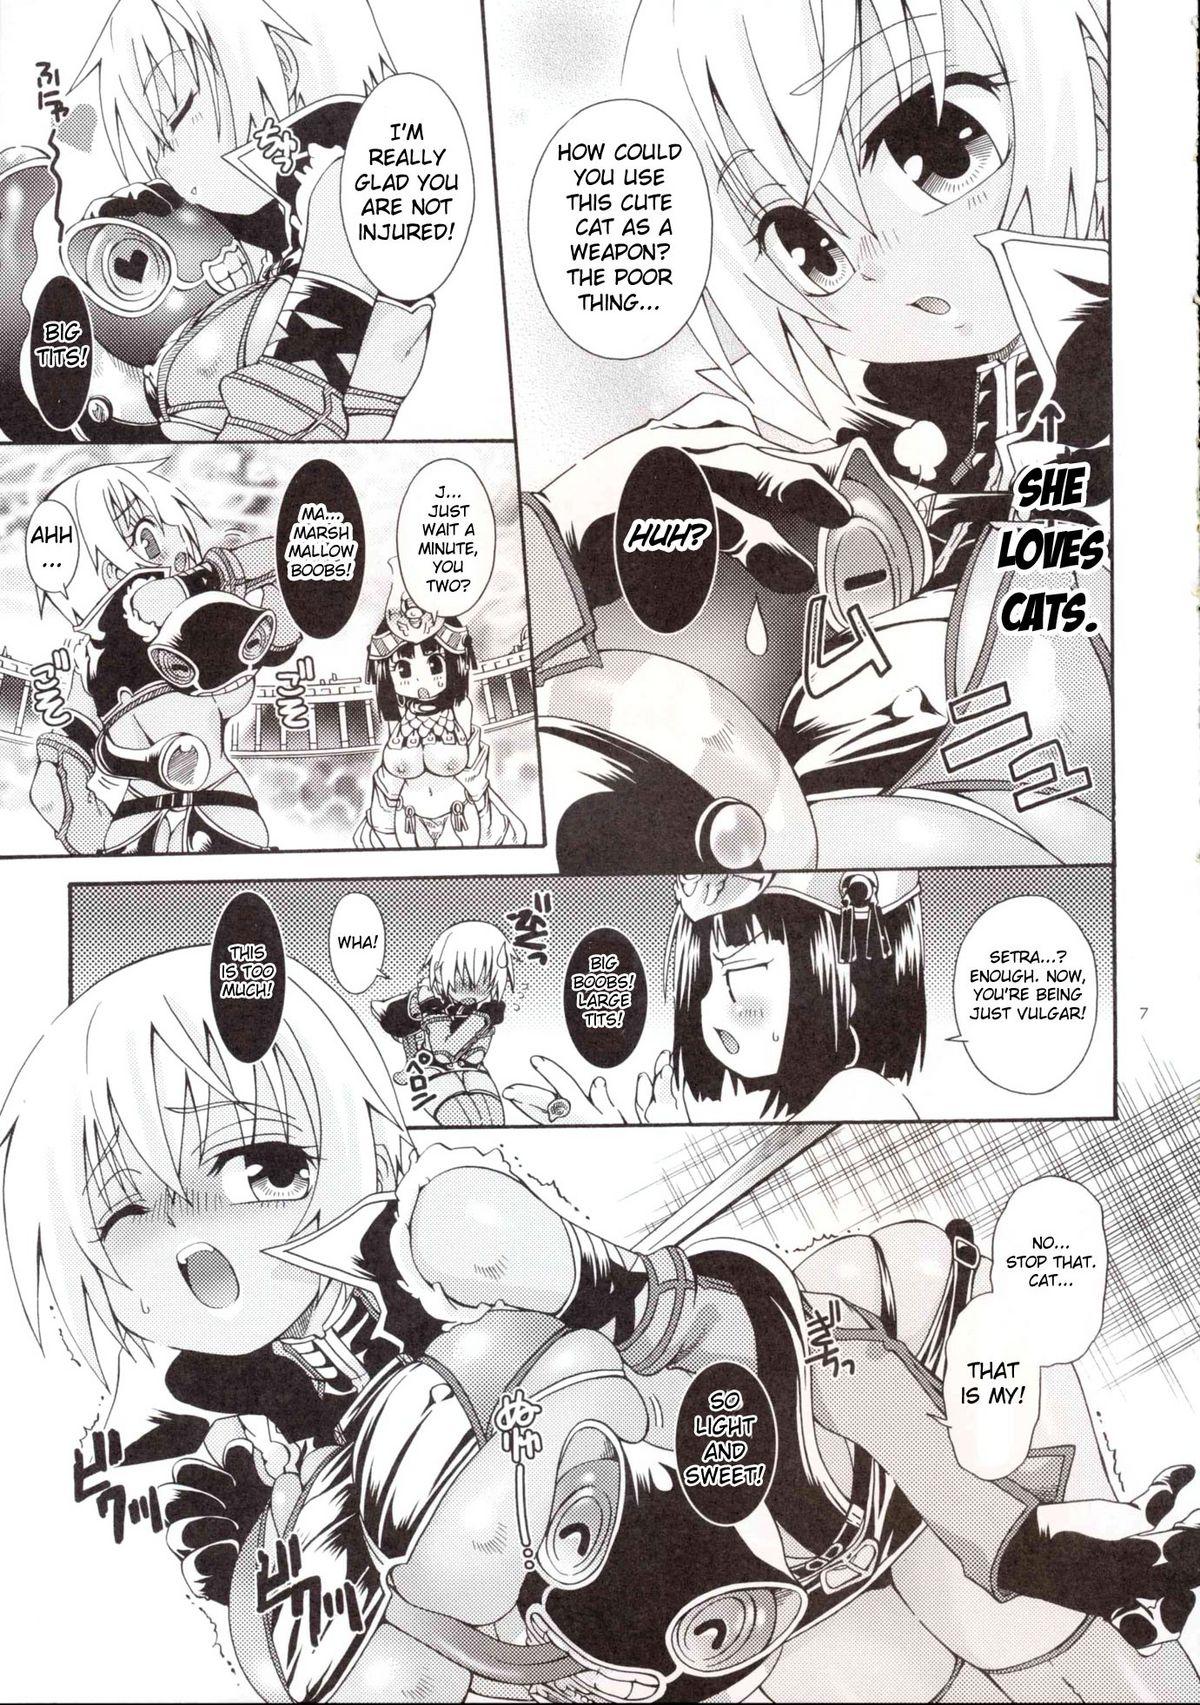 Jerk Off Instruction Cat Fight Over Drive - Queens blade Couch - Page 6